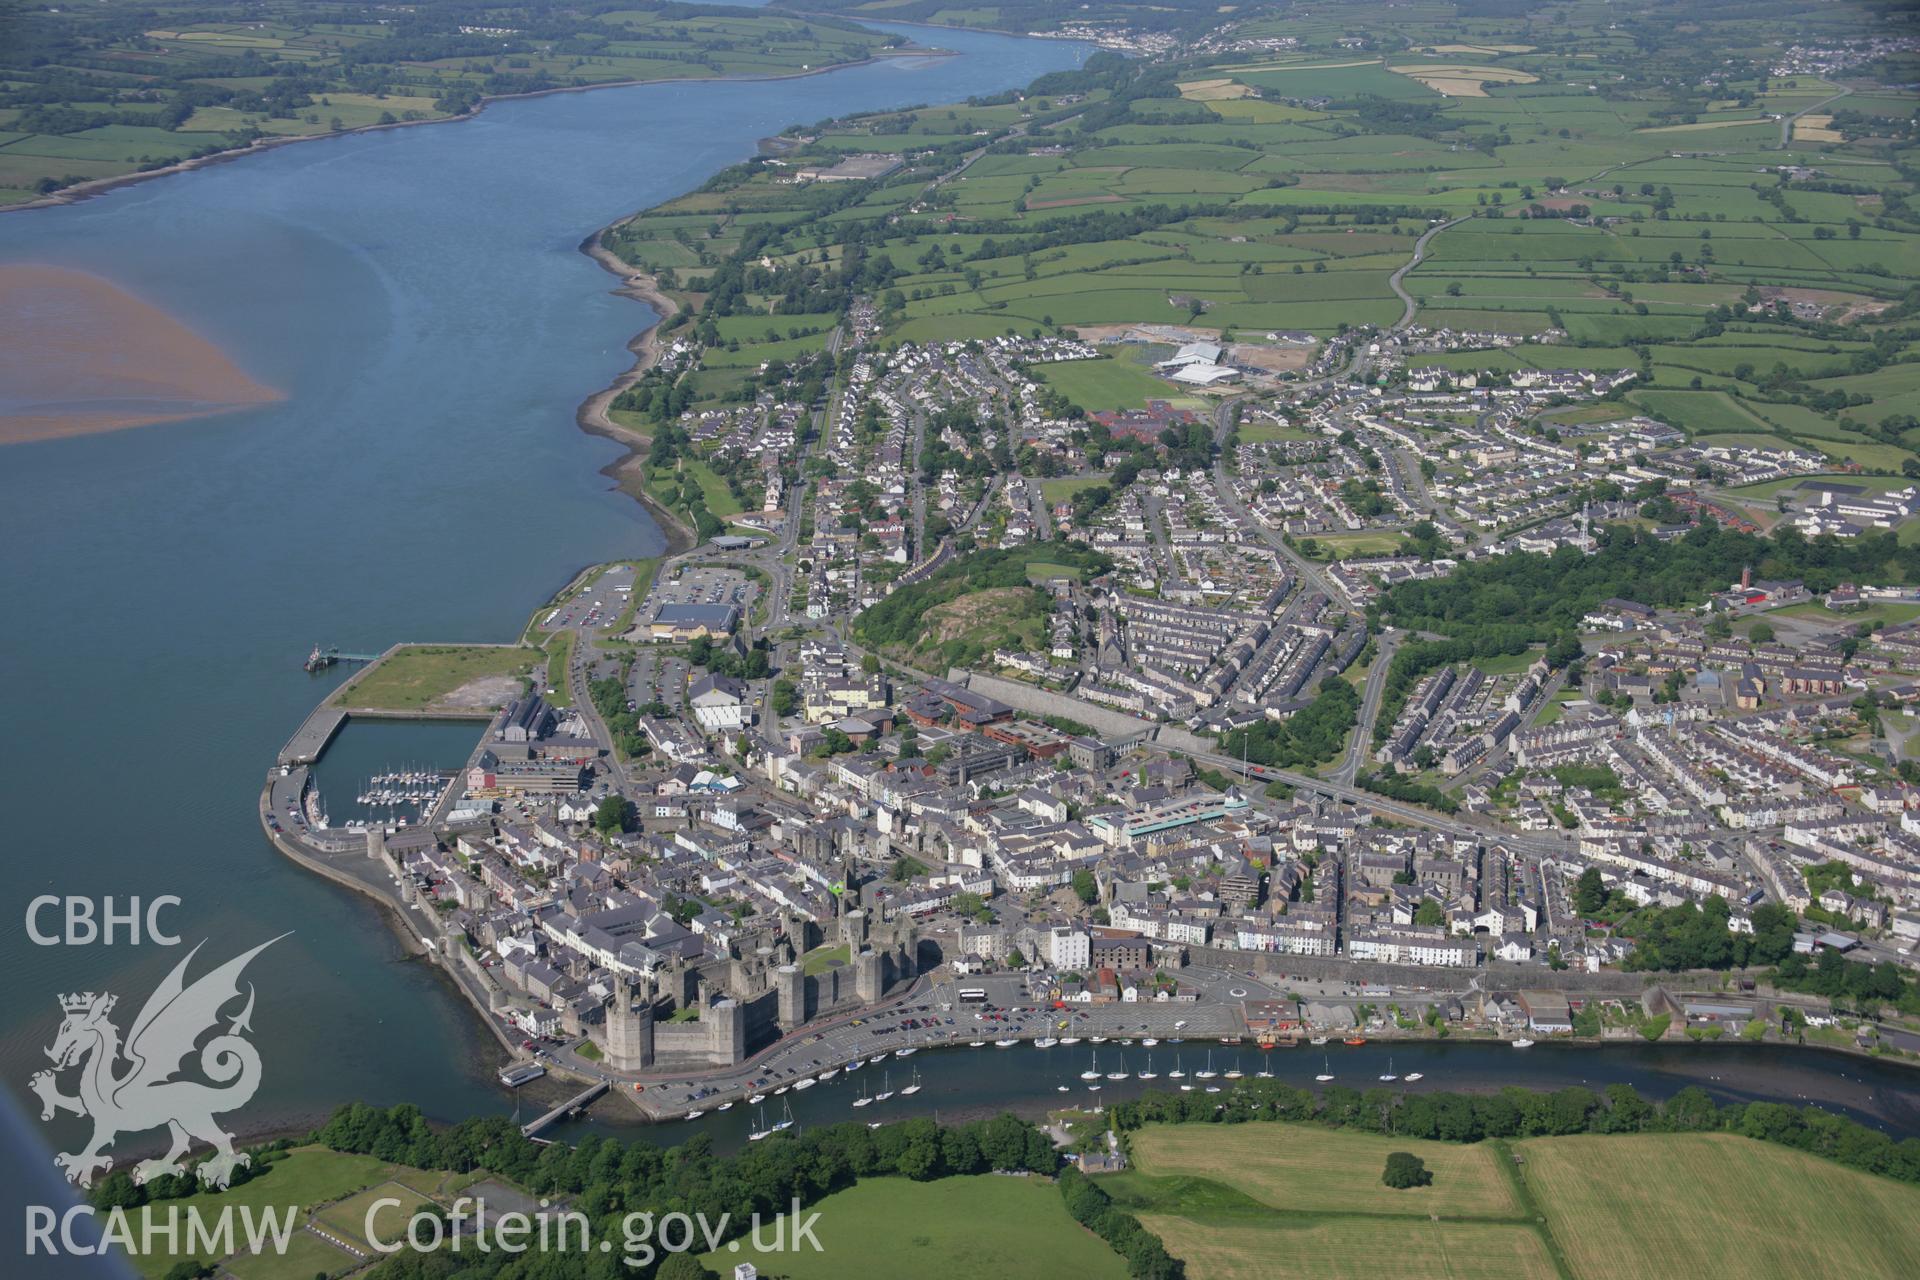 RCAHMW colour oblique aerial photograph of Caernarfon Castle and the walled town from the south-west. Taken on 14 June 2006 by Toby Driver.